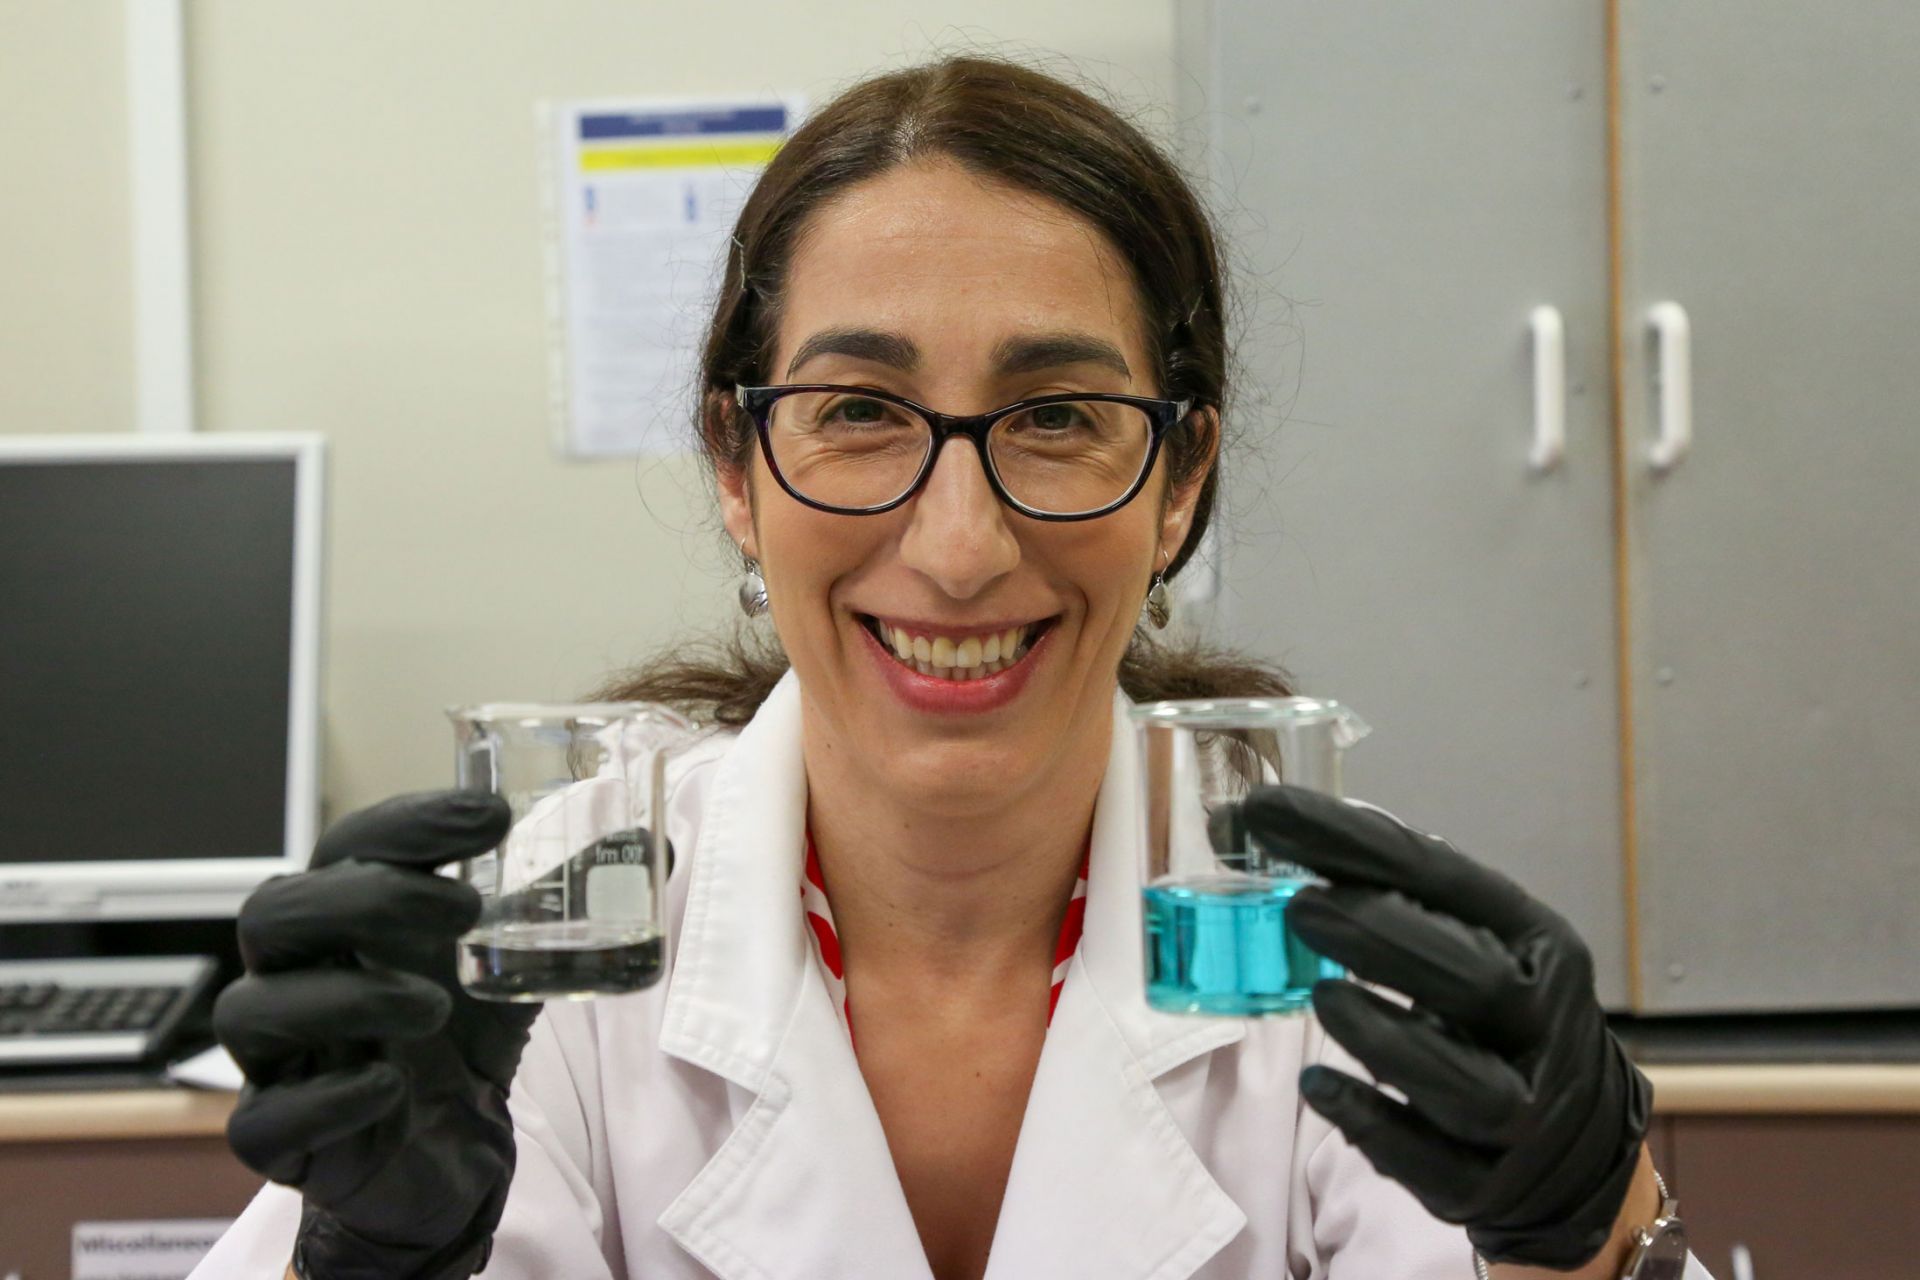 Close up photo of a female scientist in a lab coat holding two beakers, one with blue liquid and one with clear liquid